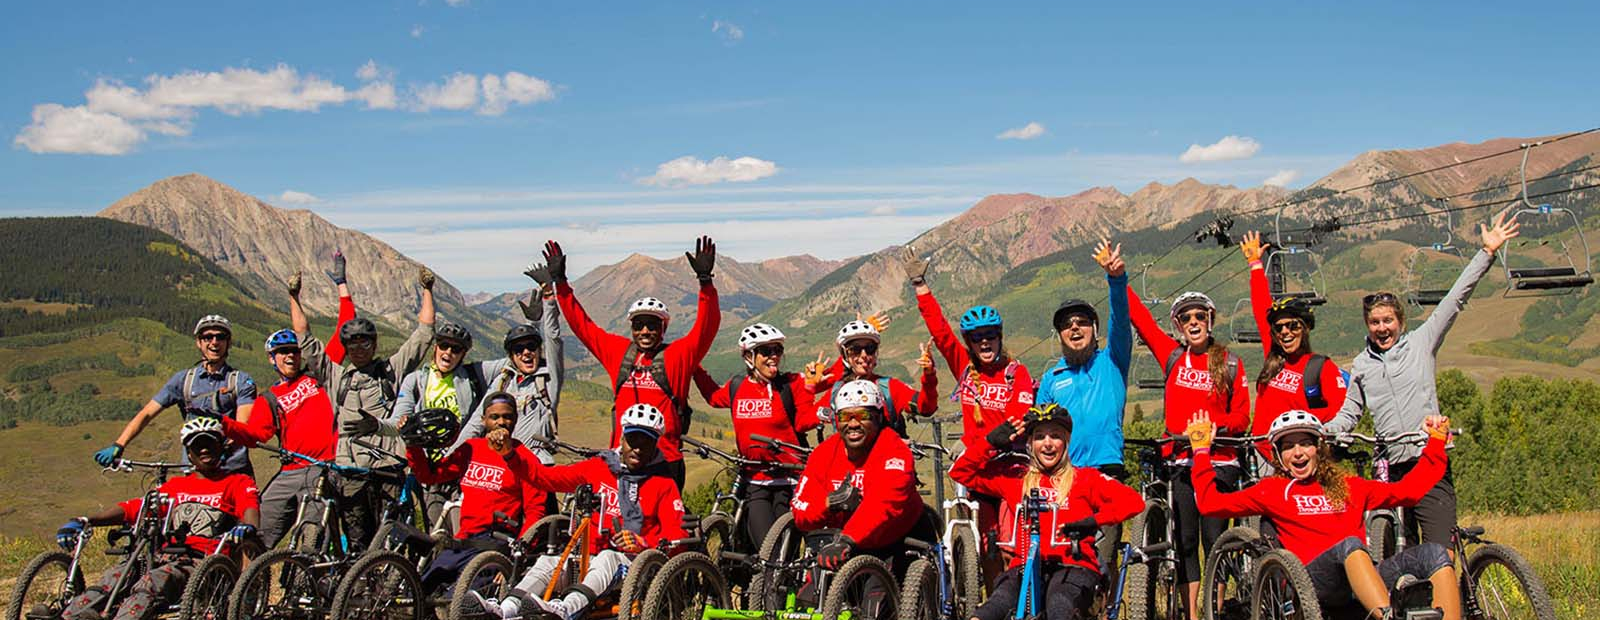 Group of adaptive cyclists on Mount Crested Butte